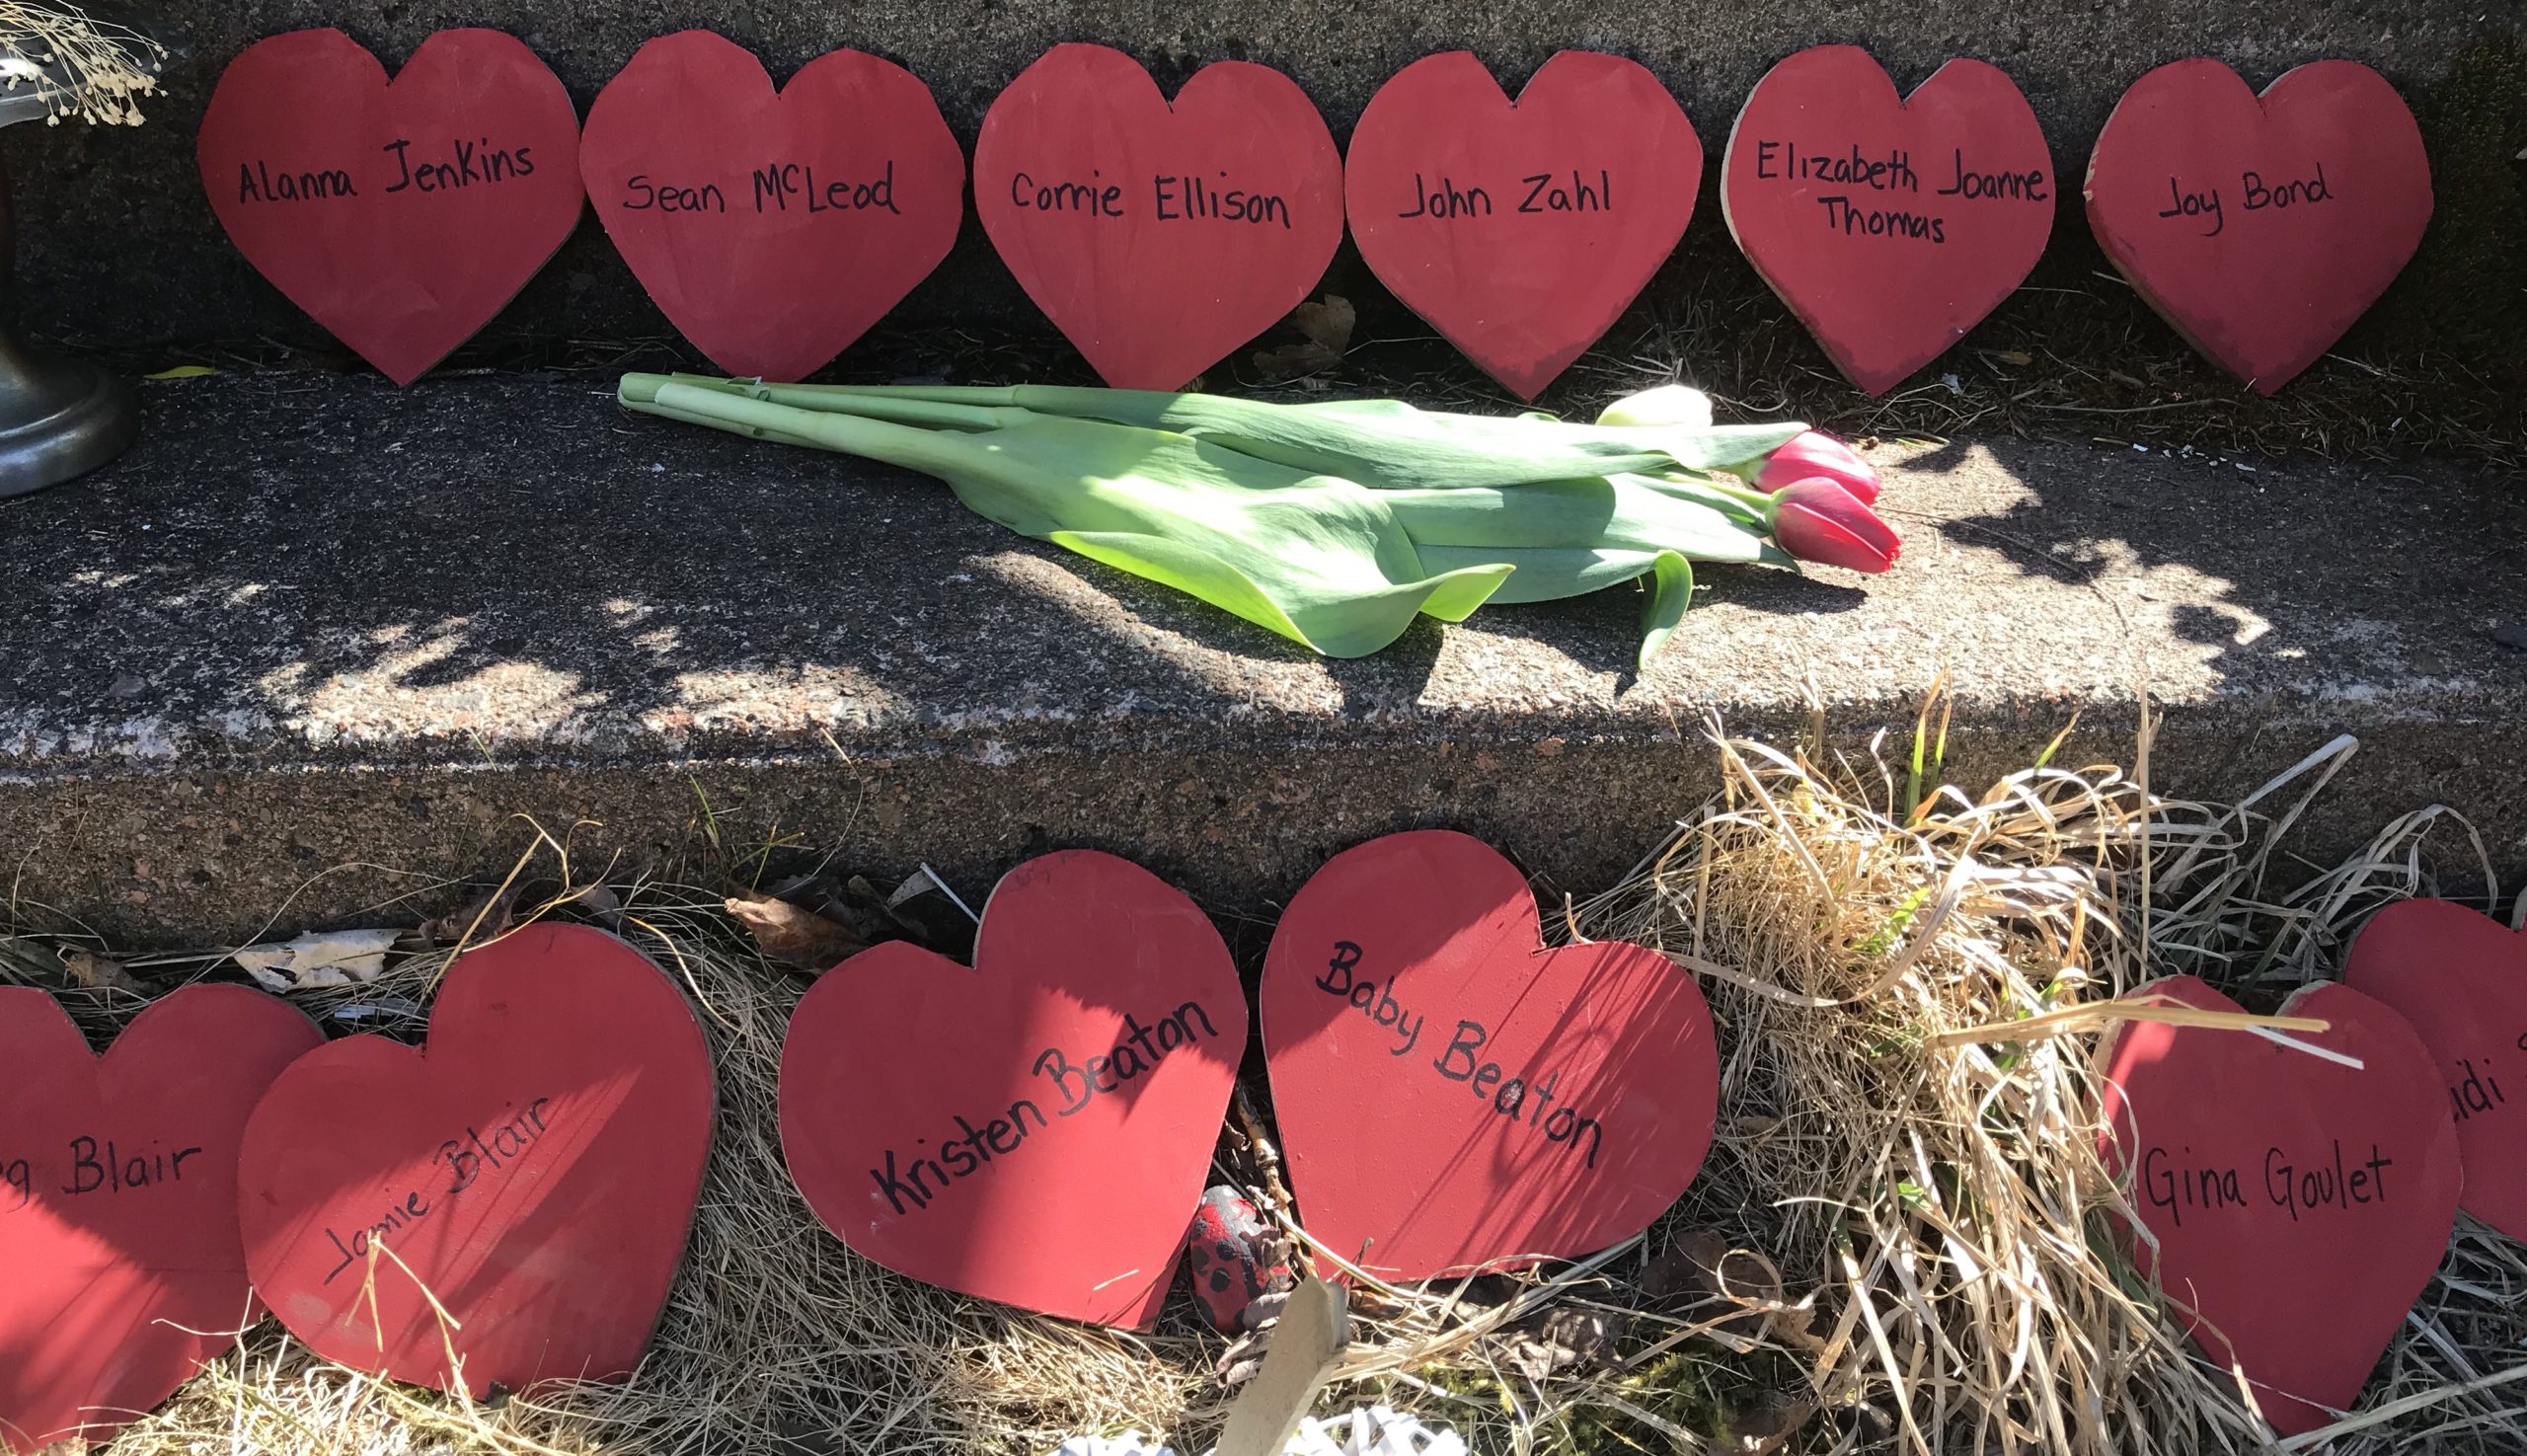 A memorial on the church steps, for victims of the mass shooter, with red paper hearts and tulips